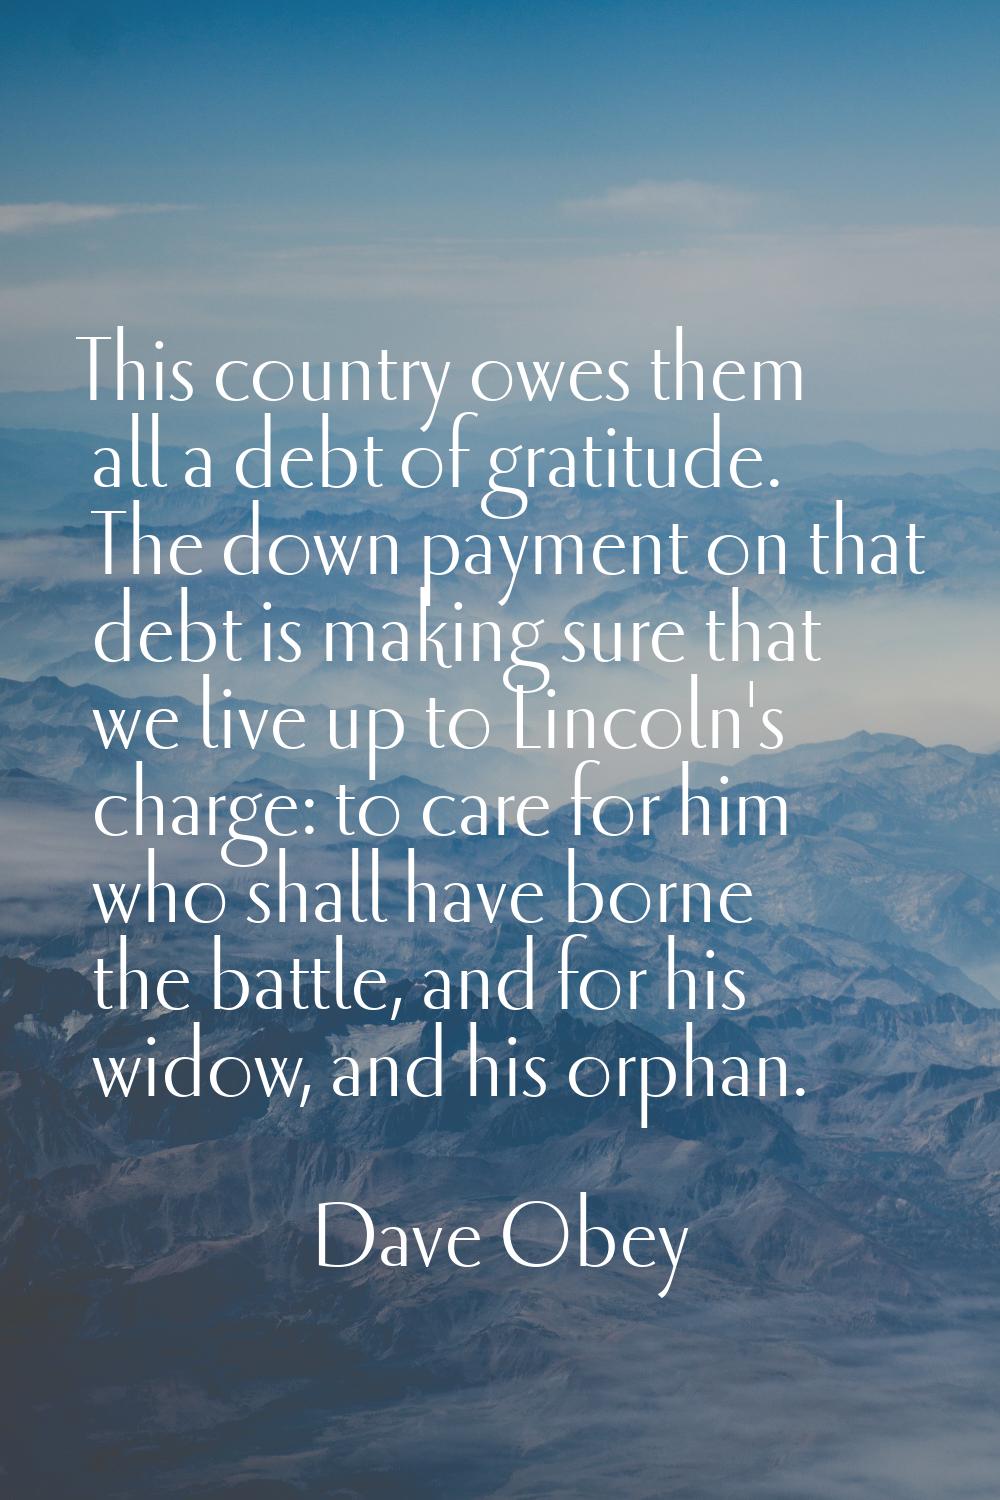 This country owes them all a debt of gratitude. The down payment on that debt is making sure that w